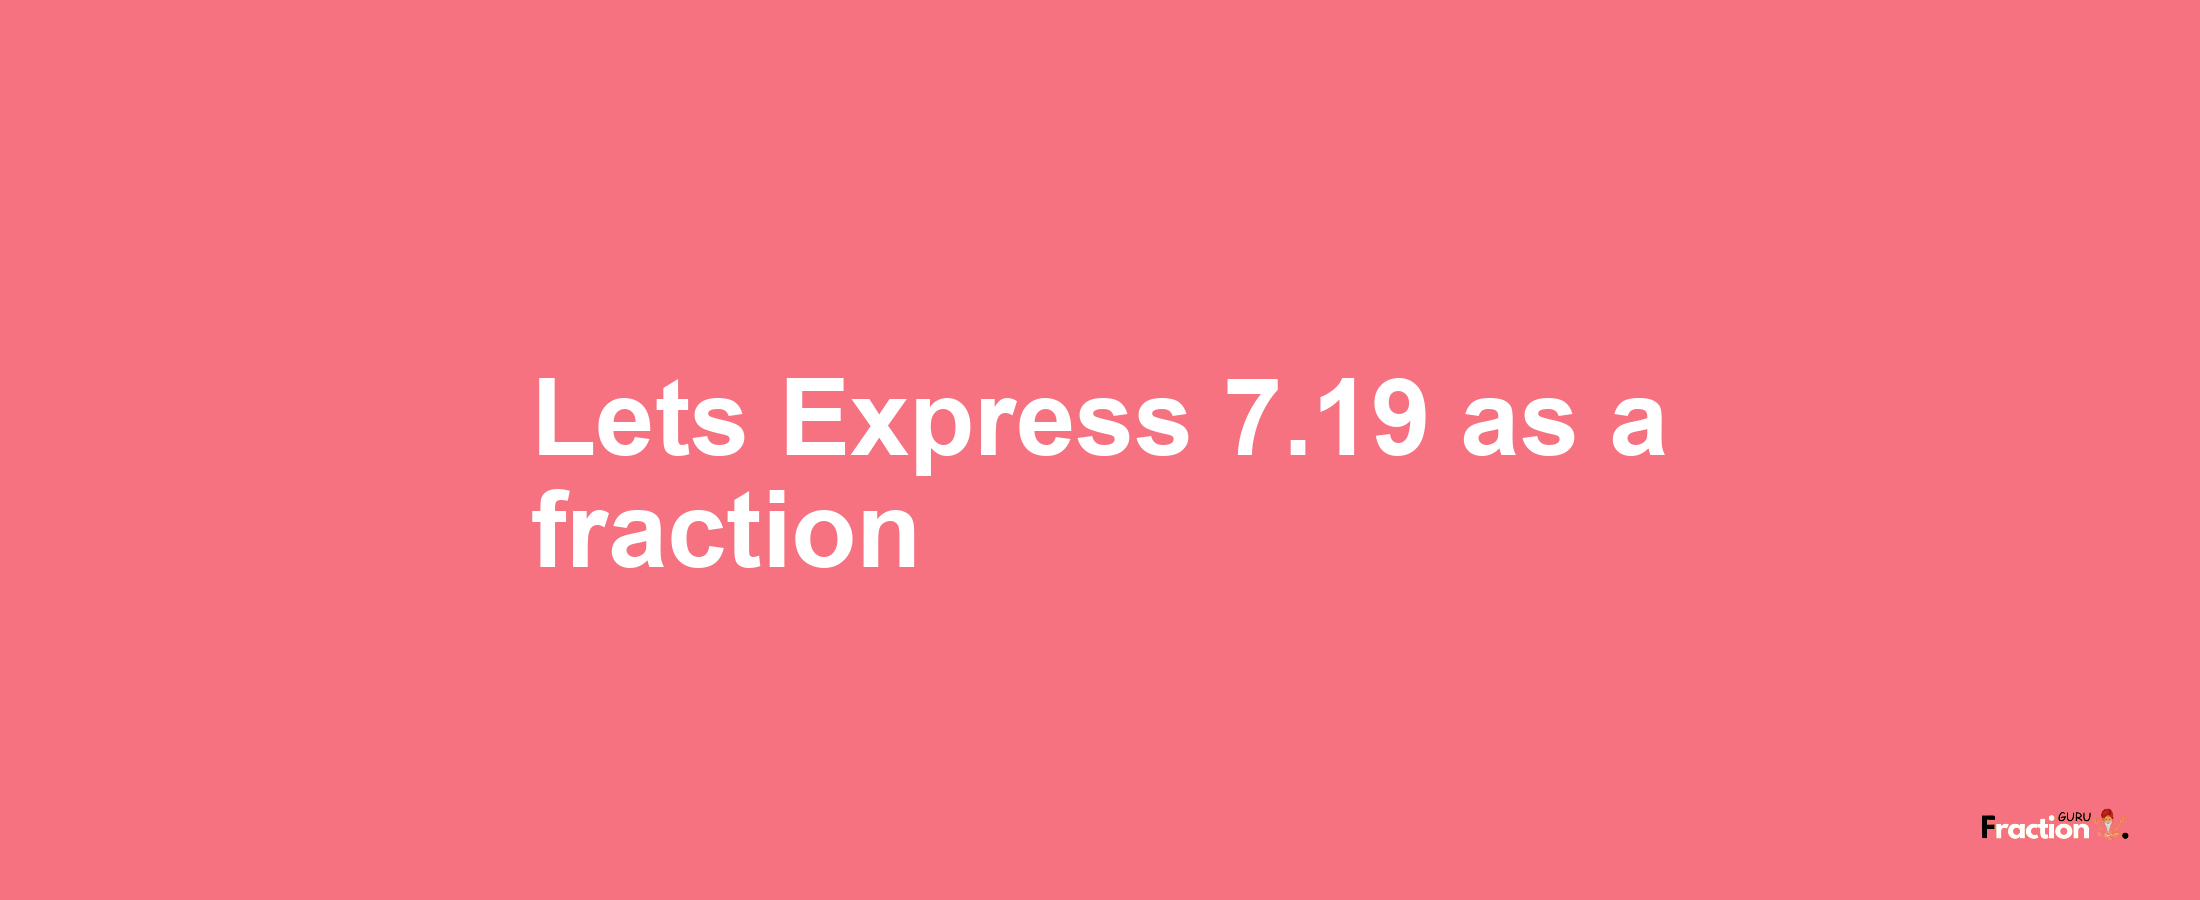 Lets Express 7.19 as afraction